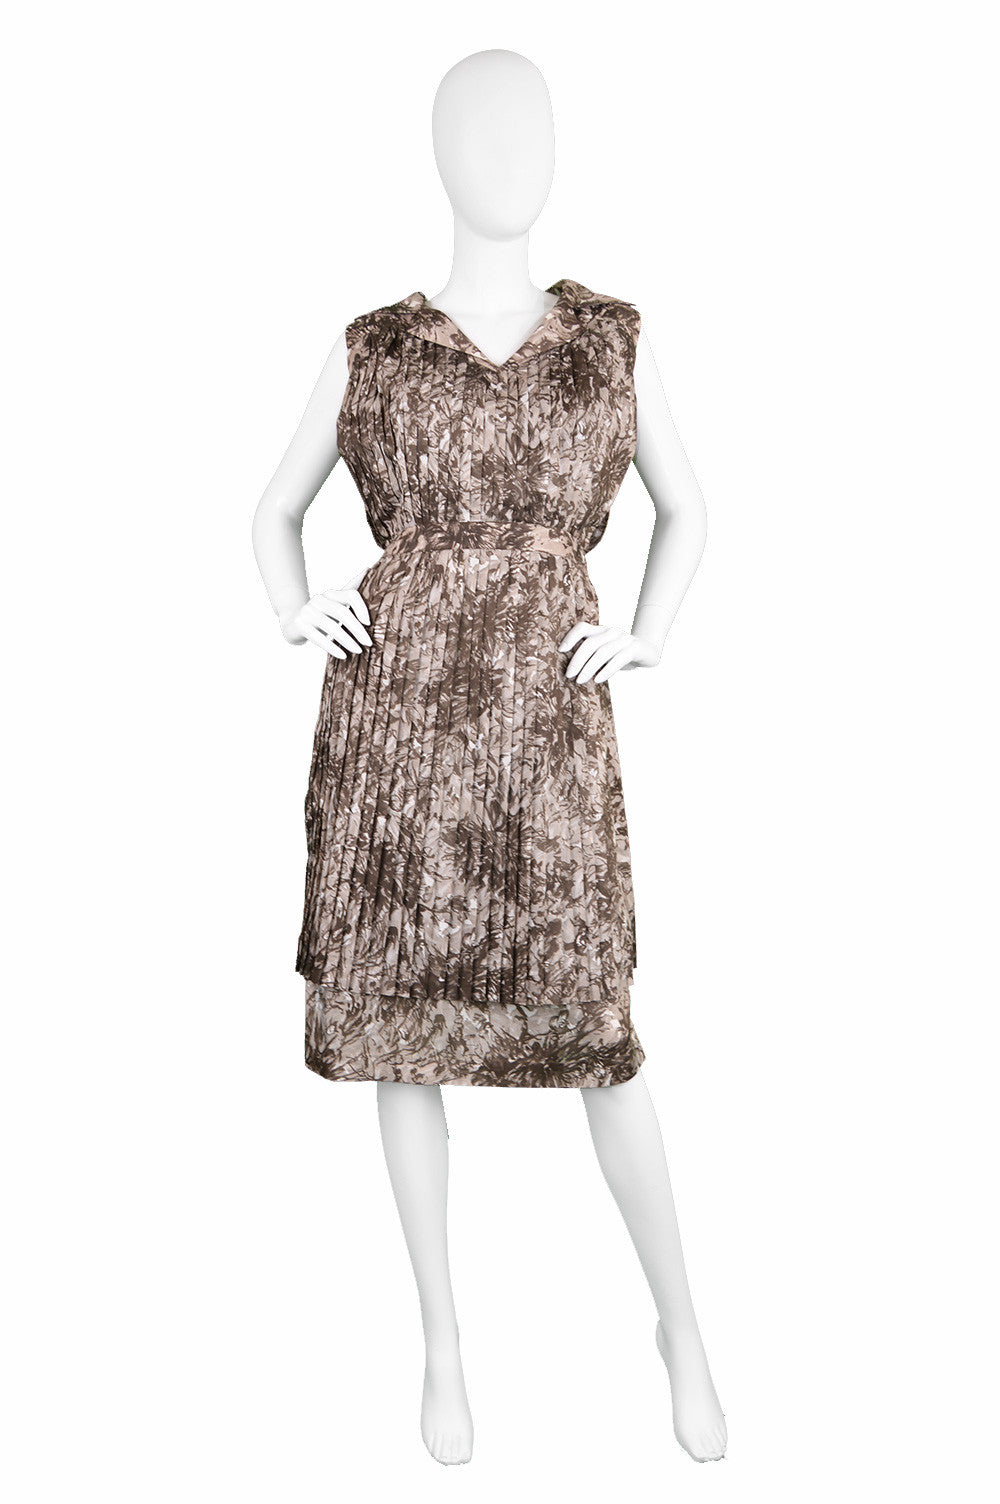 Vintage Frank Usher dress in a brown floral printed fabric, 1960s